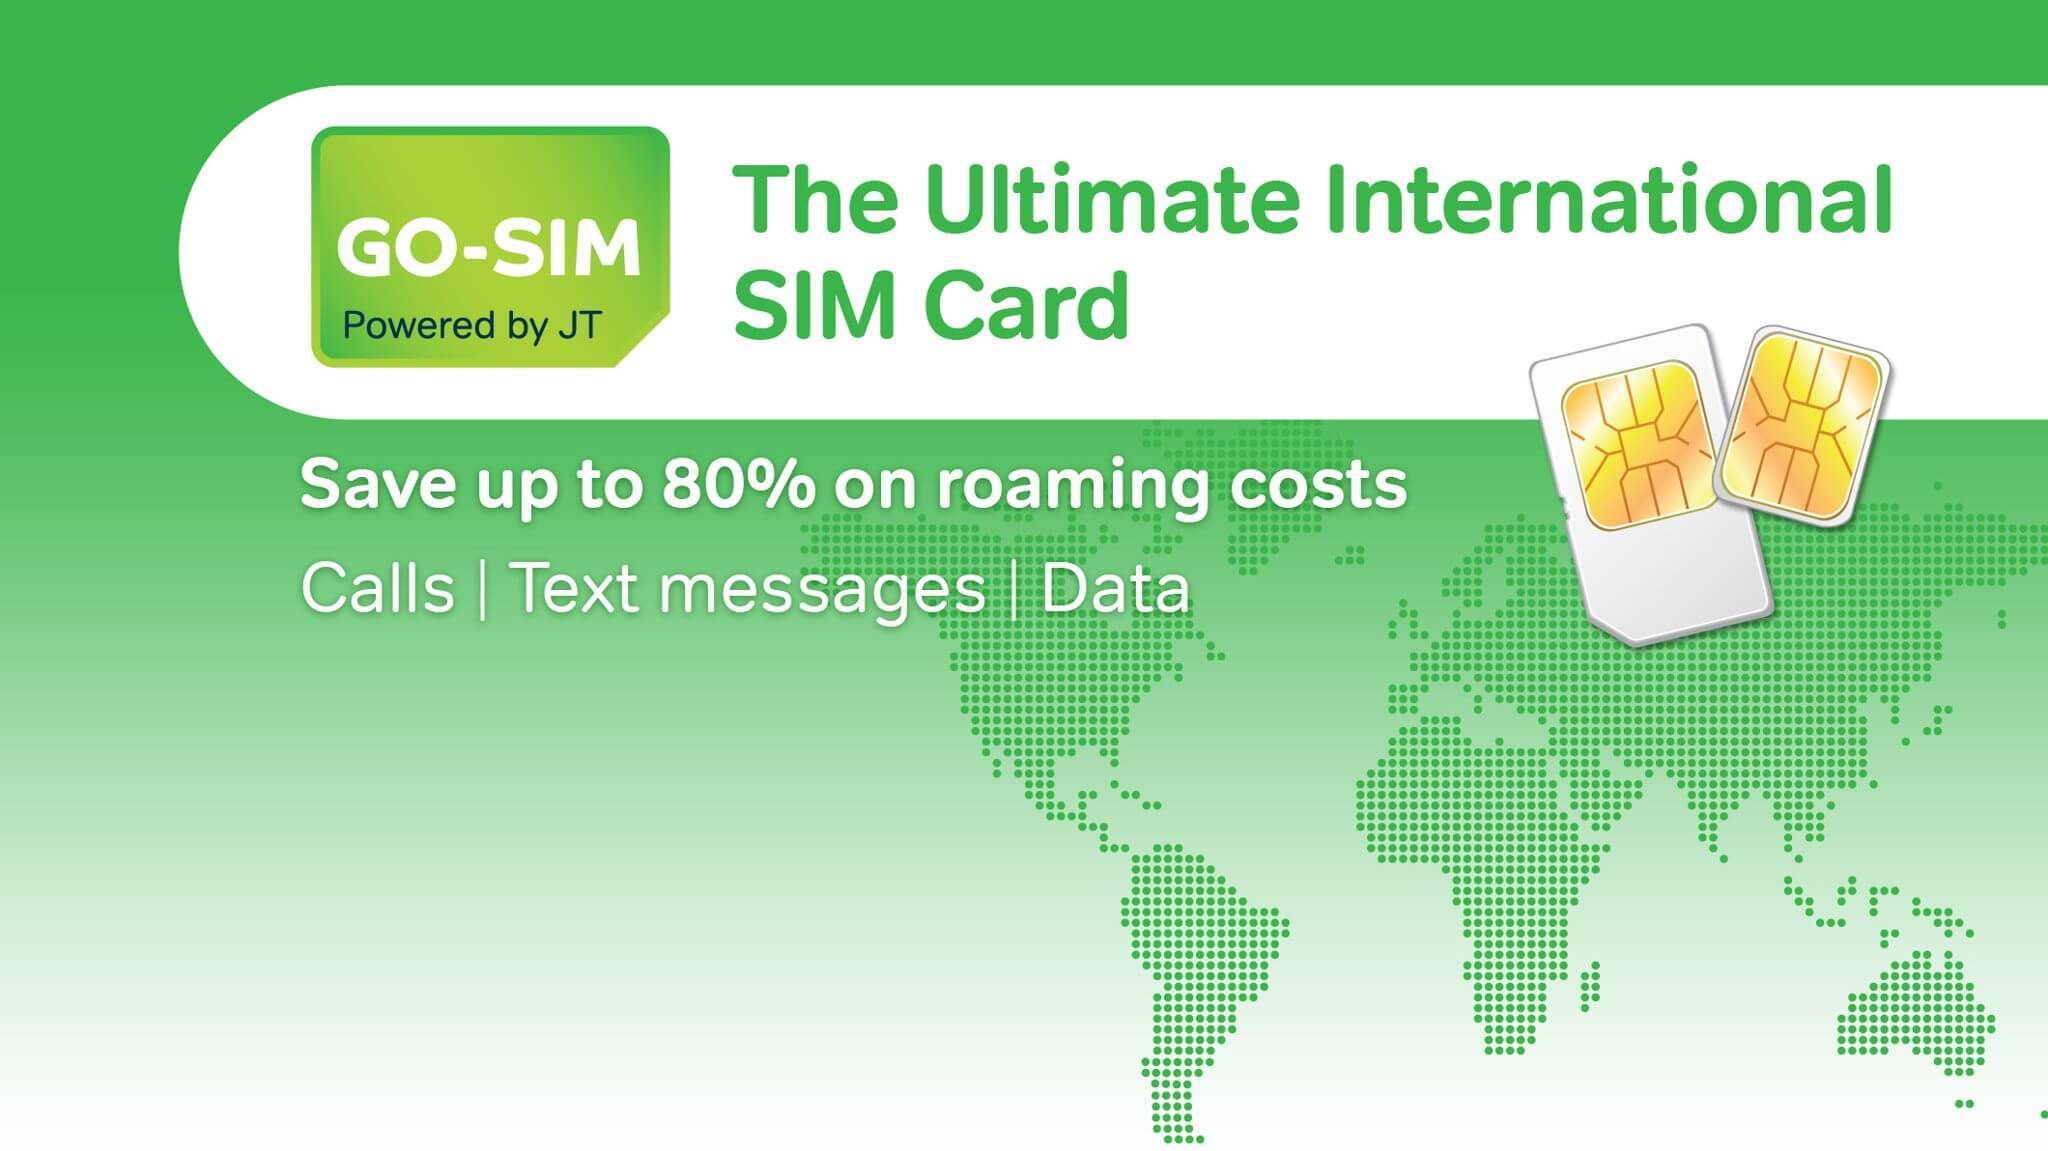 Best SIM Card for Travelling in Europe, the USA, or Asia - GoSim